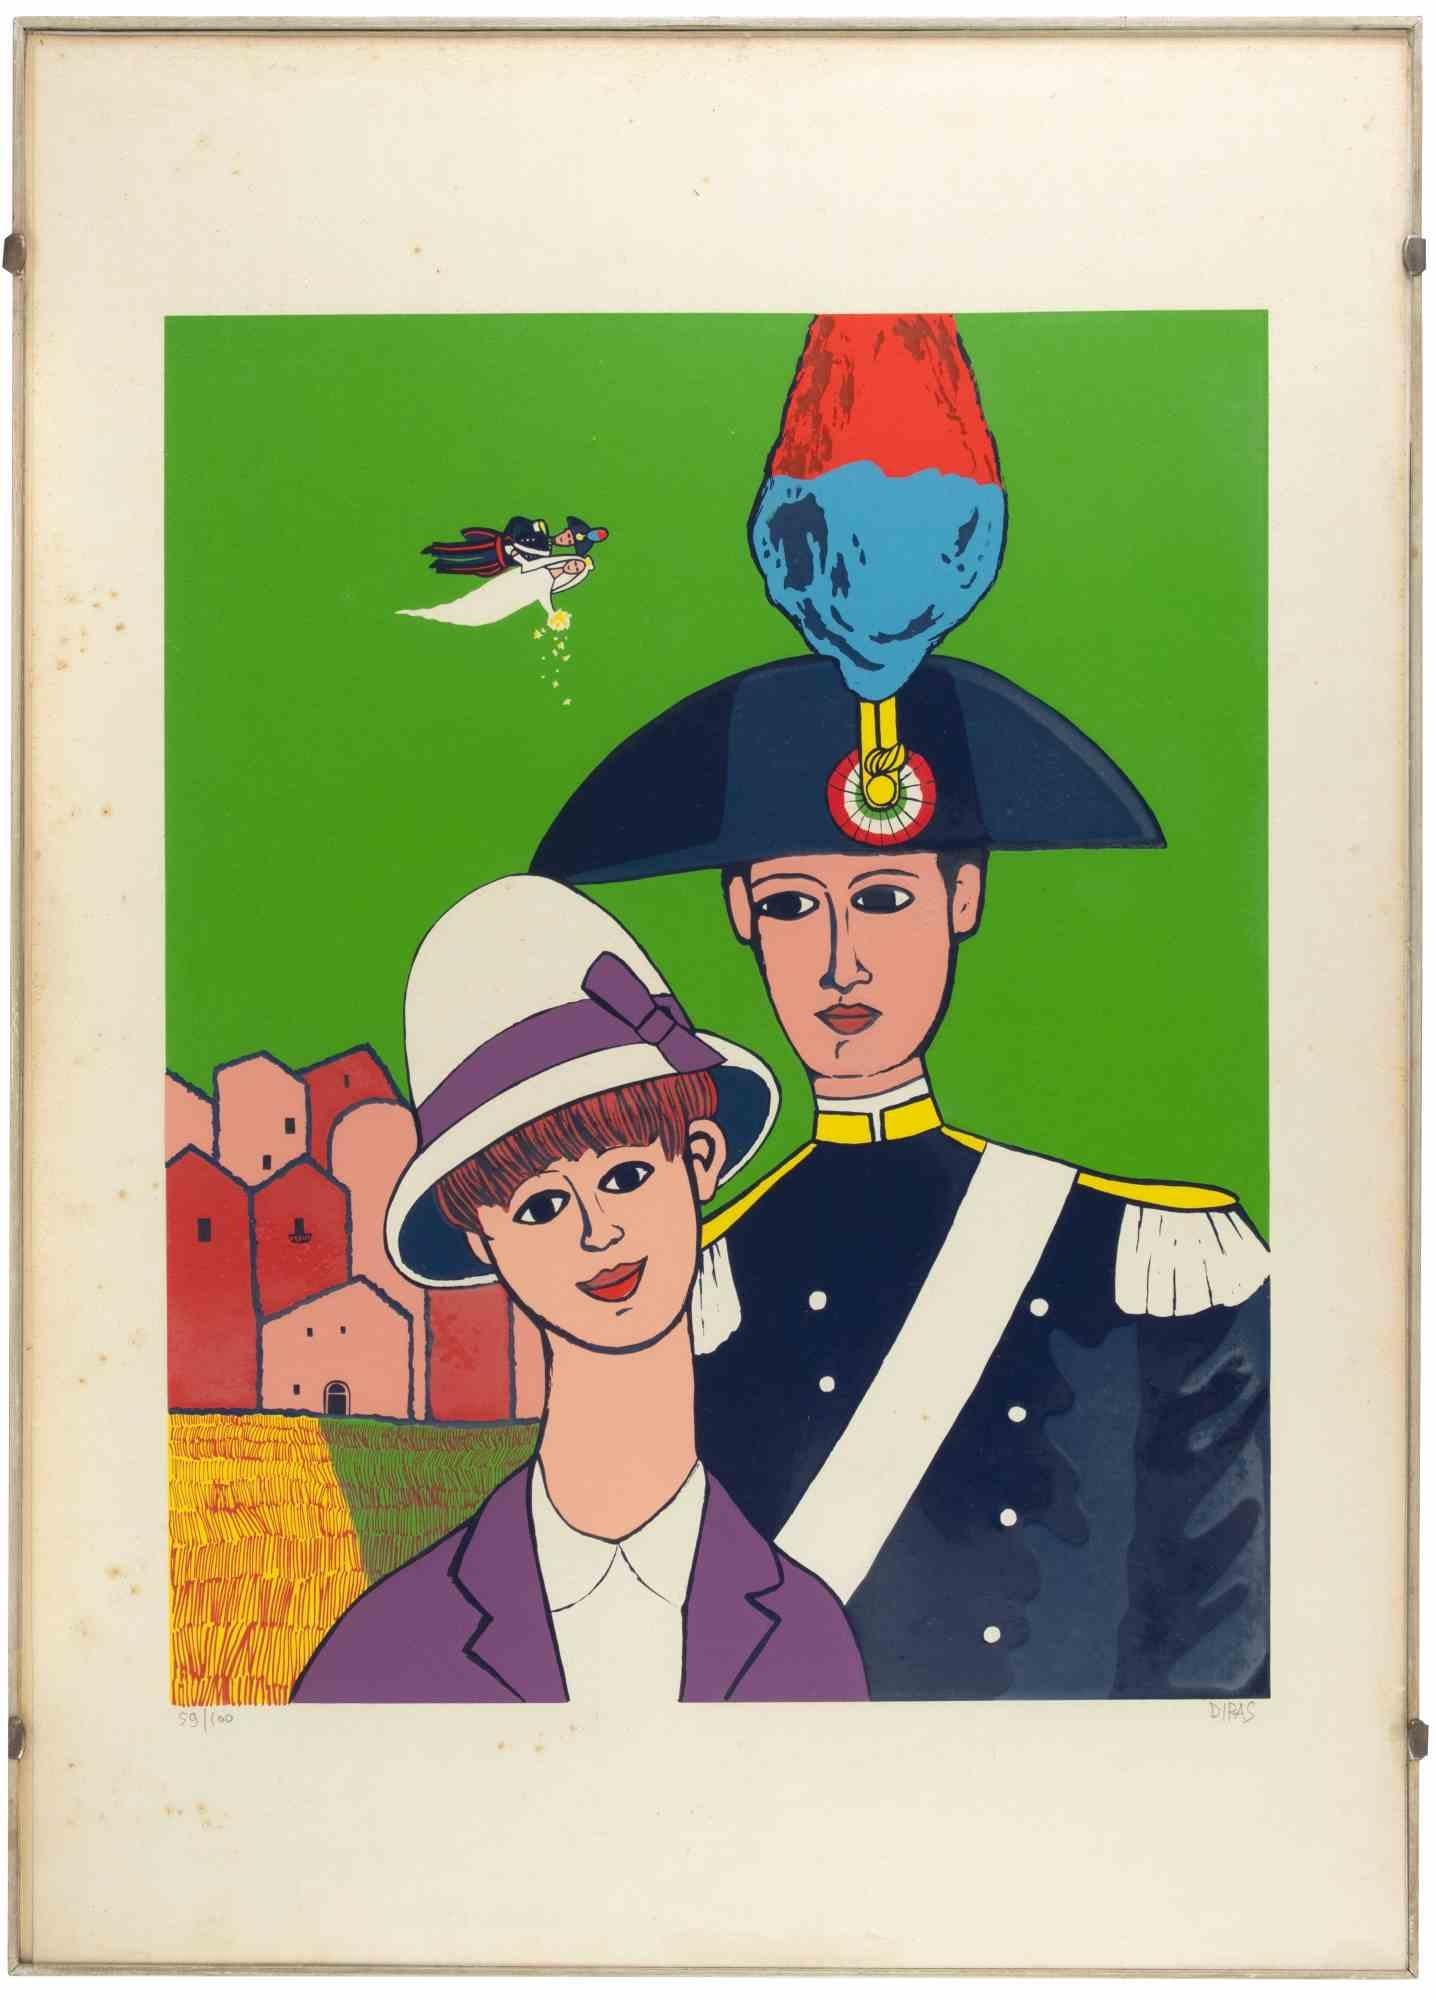 Carabiniers is a contemporary artwork realized by the artist Dipas in the 1970s.

Mixed colored lithograph.

Hand signed on the lower right margin.

Numbered on the lower left margin.

Edition of 59/100.

Foxings on paper.

